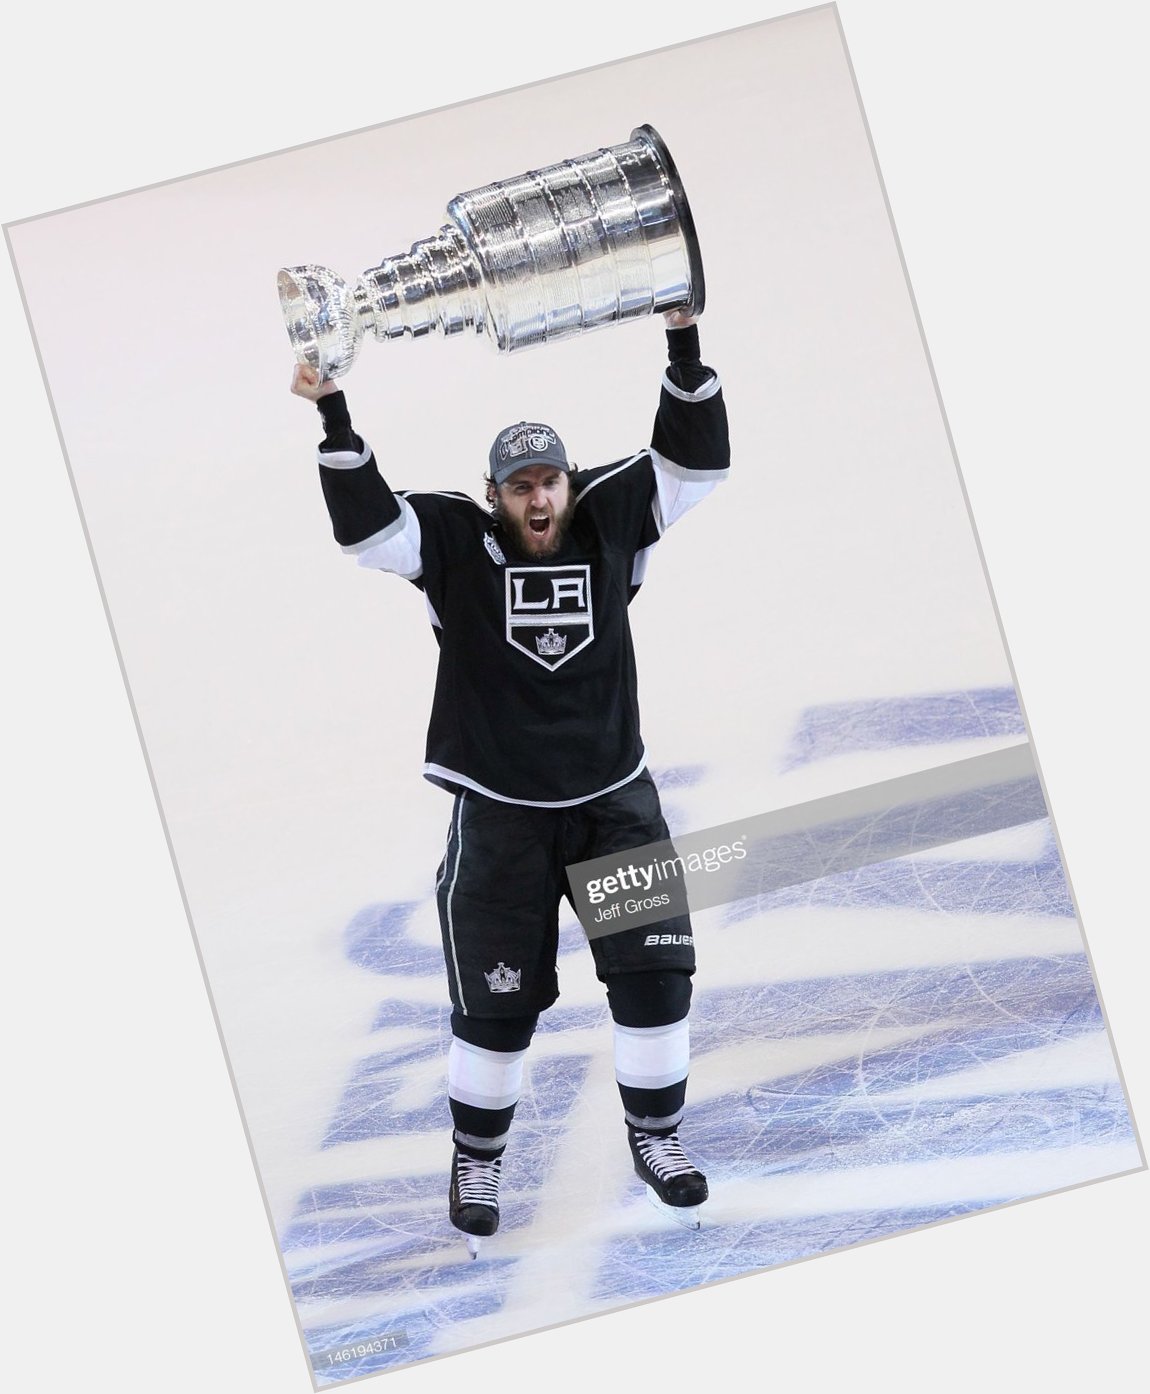 Happy birthday to former center Mike Richards, who was born on February 11, 1985.  